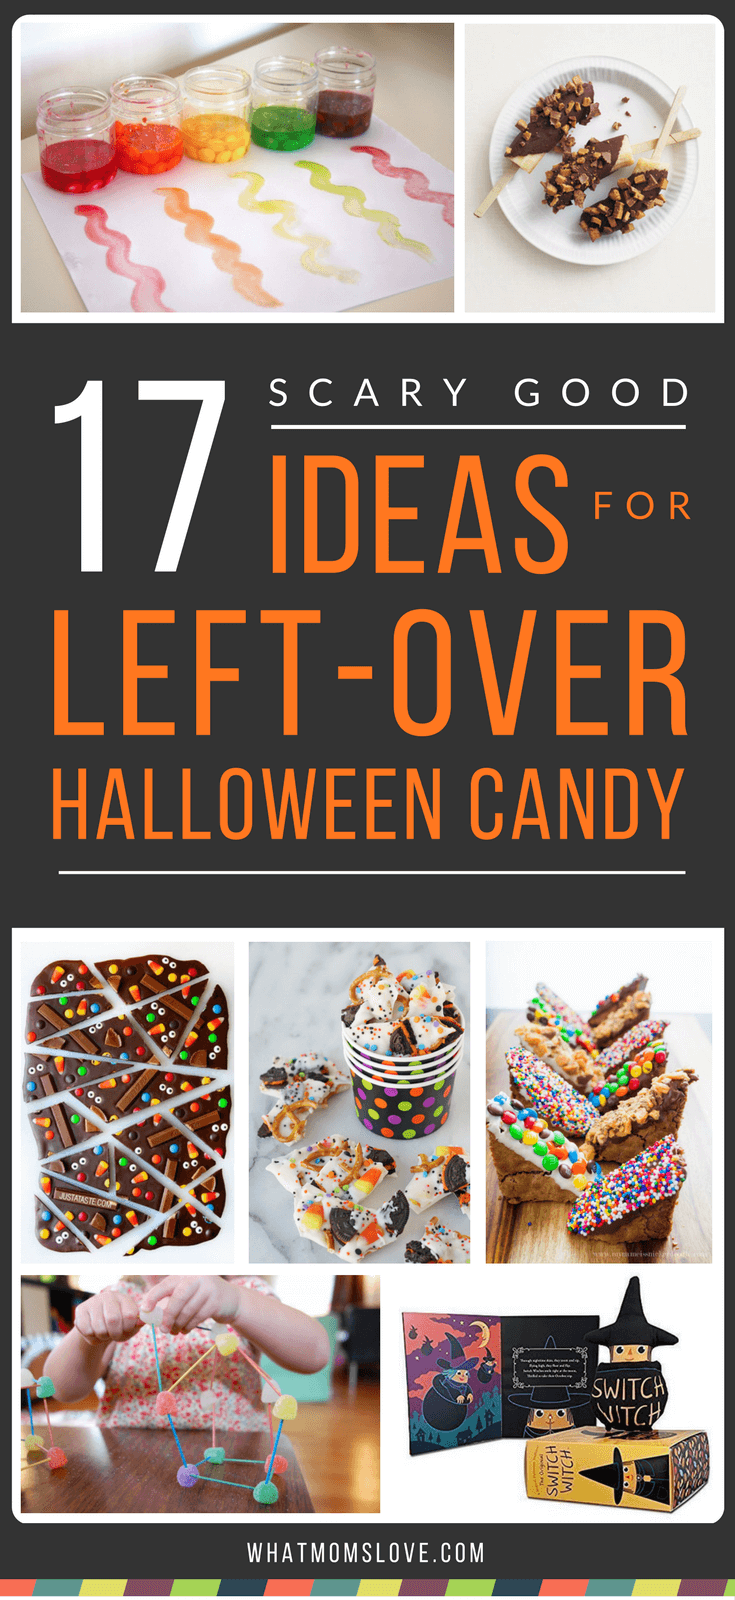 What to do with leftover halloween candy